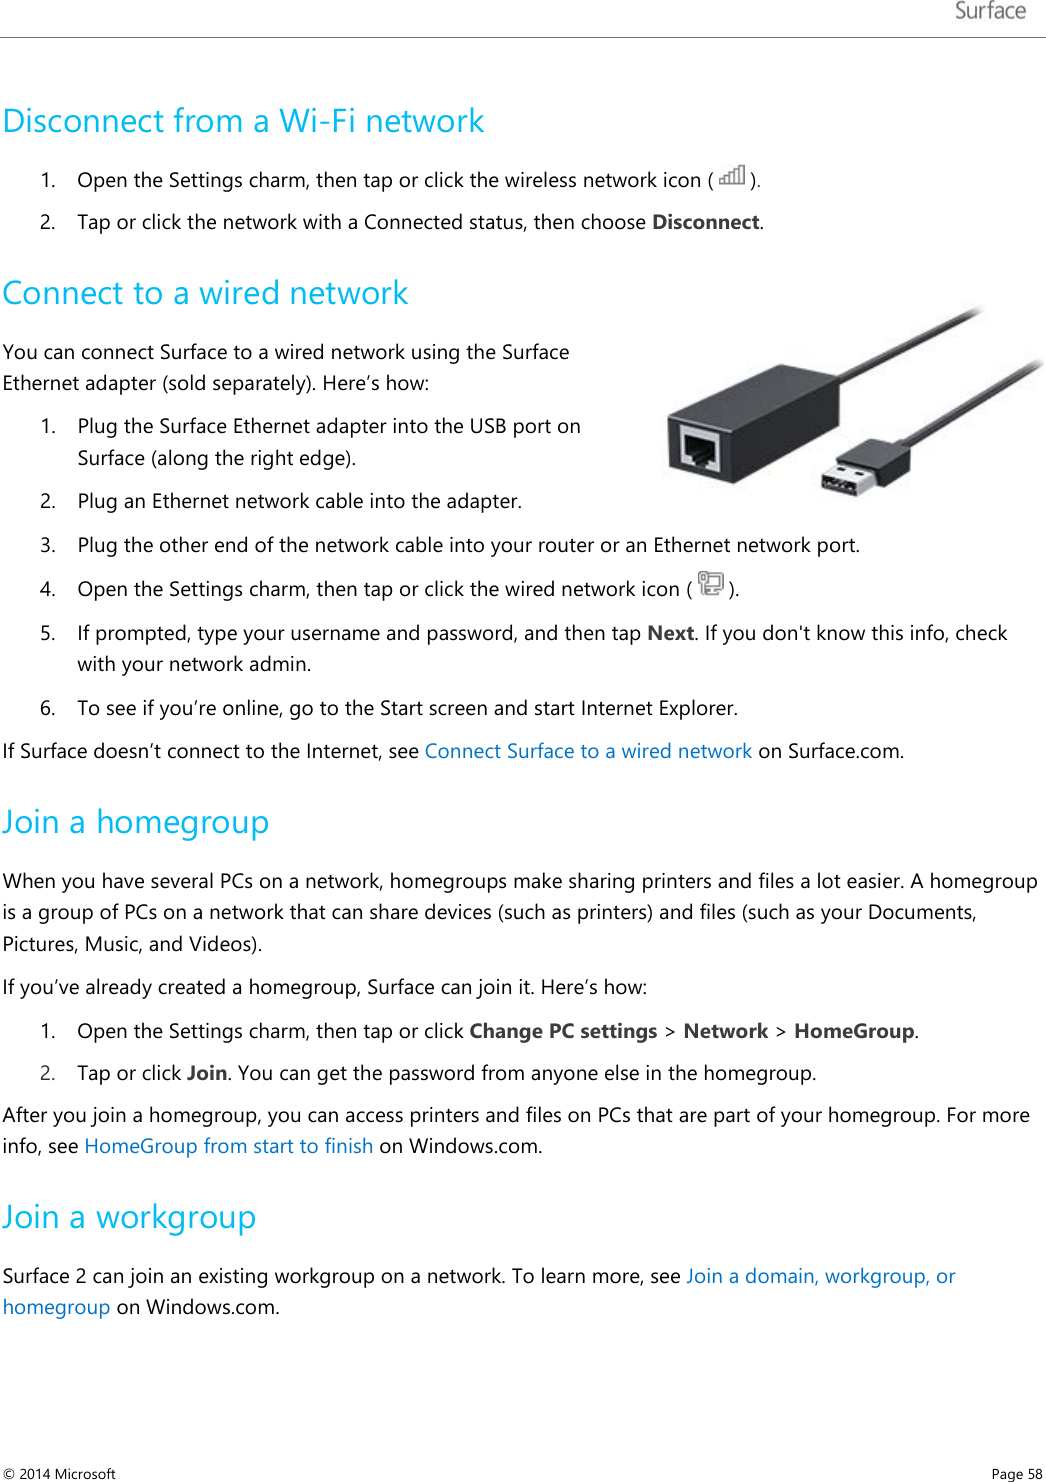   Disconnect from a Wi-Fi network 1. Open the Settings charm, then tap or click the wireless network icon (   ). 2. Tap or click the network with a Connected status, then choose Disconnect. Connect to a wired network  You can connect Surface to a wired network using the Surface Ethernet adapter (sold separately). Here’s how: 1. Plug the Surface Ethernet adapter into the USB port on Surface (along the right edge).  2. Plug an Ethernet network cable into the adapter.  3. Plug the other end of the network cable into your router or an Ethernet network port.  4. Open the Settings charm, then tap or click the wired network icon (   ). 5. If prompted, type your username and password, and then tap Next. If you don&apos;t know this info, check with your network admin. 6. To see if you’re online, go to the Start screen and start Internet Explorer. If Surface doesn’t connect to the Internet, see Connect Surface to a wired network on Surface.com.  Join a homegroup When you have several PCs on a network, homegroups make sharing printers and files a lot easier. A homegroup is a group of PCs on a network that can share devices (such as printers) and files (such as your Documents, Pictures, Music, and Videos). If you’ve already created a homegroup, Surface can join it. Here’s how: 1. Open the Settings charm, then tap or click Change PC settings &gt; Network &gt; HomeGroup.  2. Tap or click Join. You can get the password from anyone else in the homegroup.  After you join a homegroup, you can access printers and files on PCs that are part of your homegroup. For more info, see HomeGroup from start to finish on Windows.com.  Join a workgroup Surface 2 can join an existing workgroup on a network. To learn more, see Join a domain, workgroup, or homegroup on Windows.com. © 2014 Microsoft     Page 58  